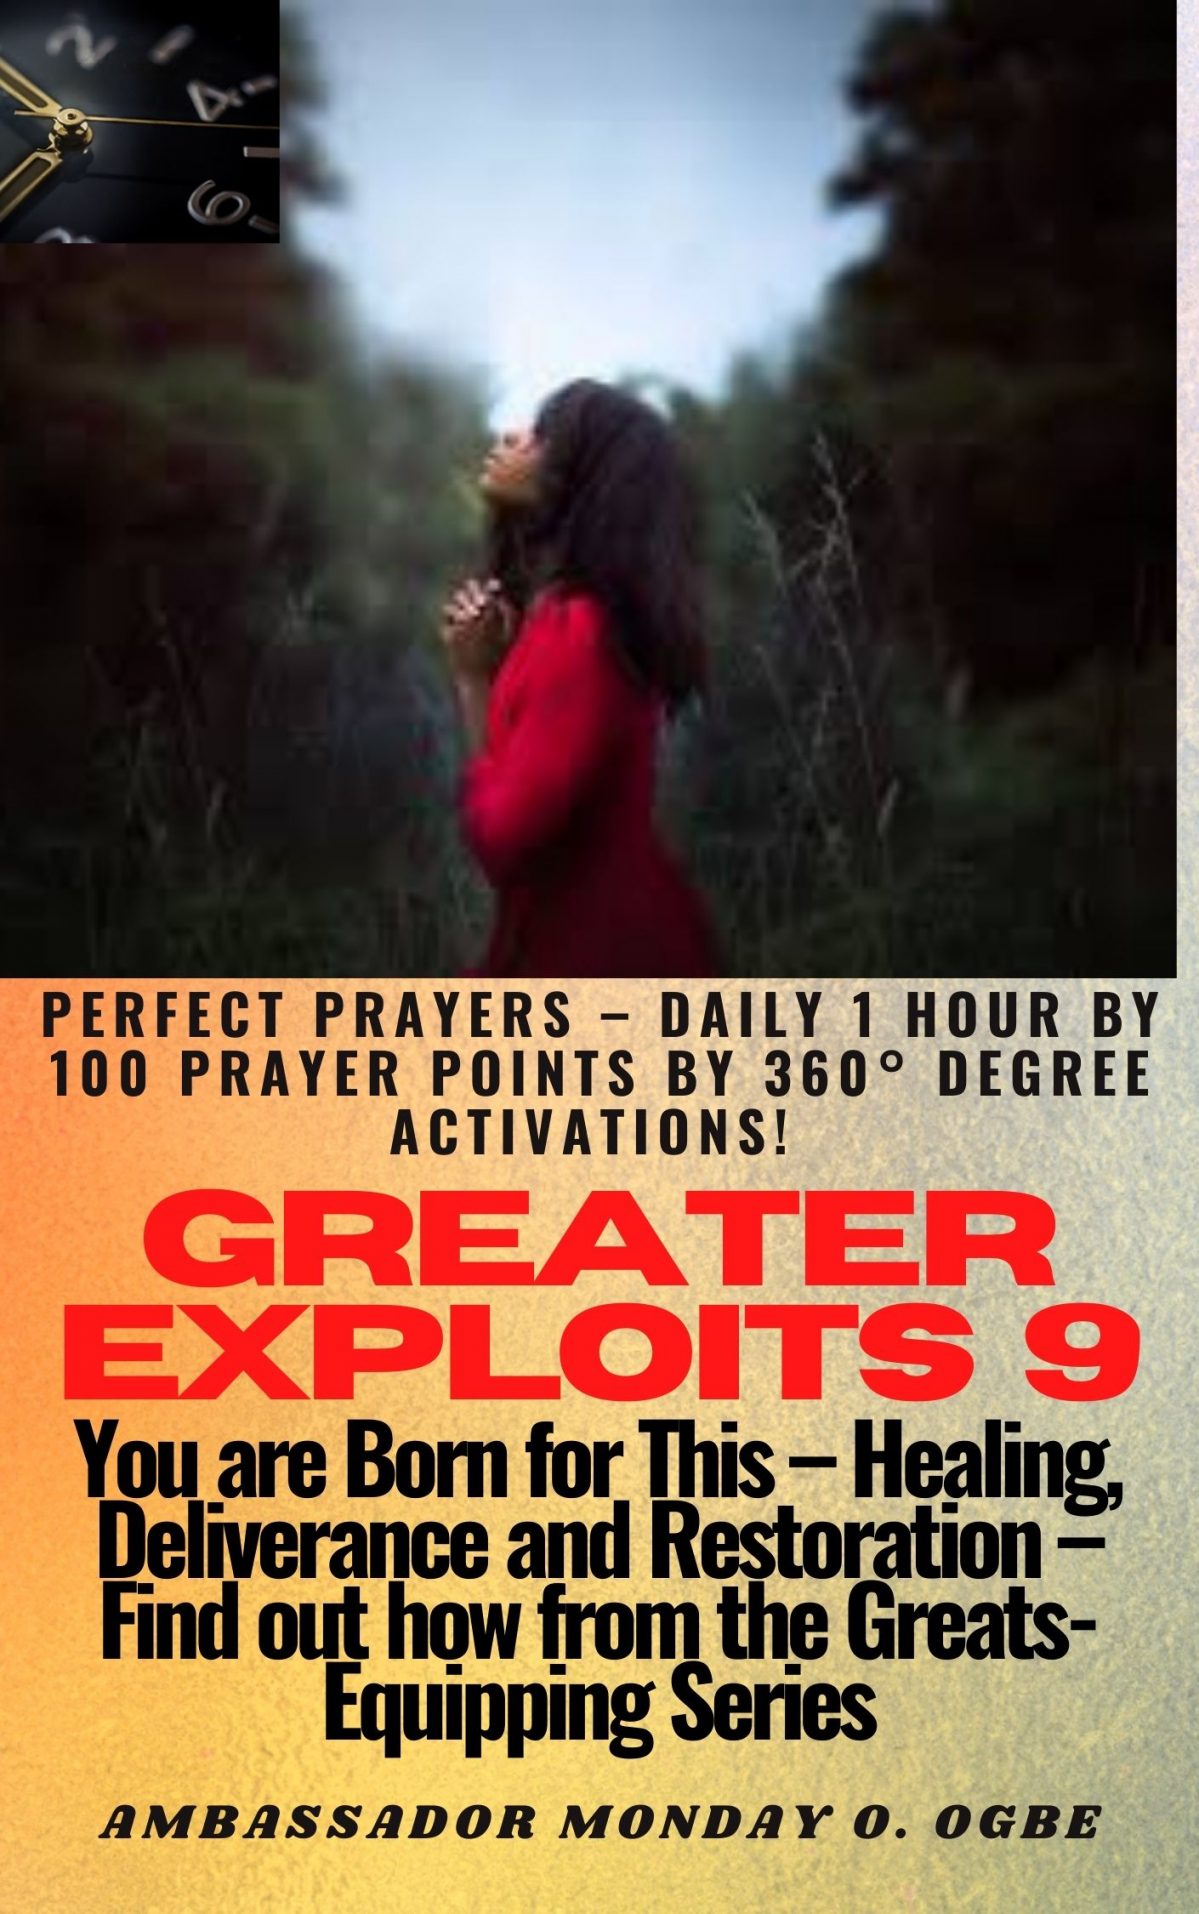 Greater Exploits – 9 Perfect Prayers – Daily 1 hour by 100 Prayer Points by 360° Degree Activations! for Exploits in Self, Family, Church, Community and Nation - You are Born for This – Healing, Deliverance and Restoration – Equipping Series